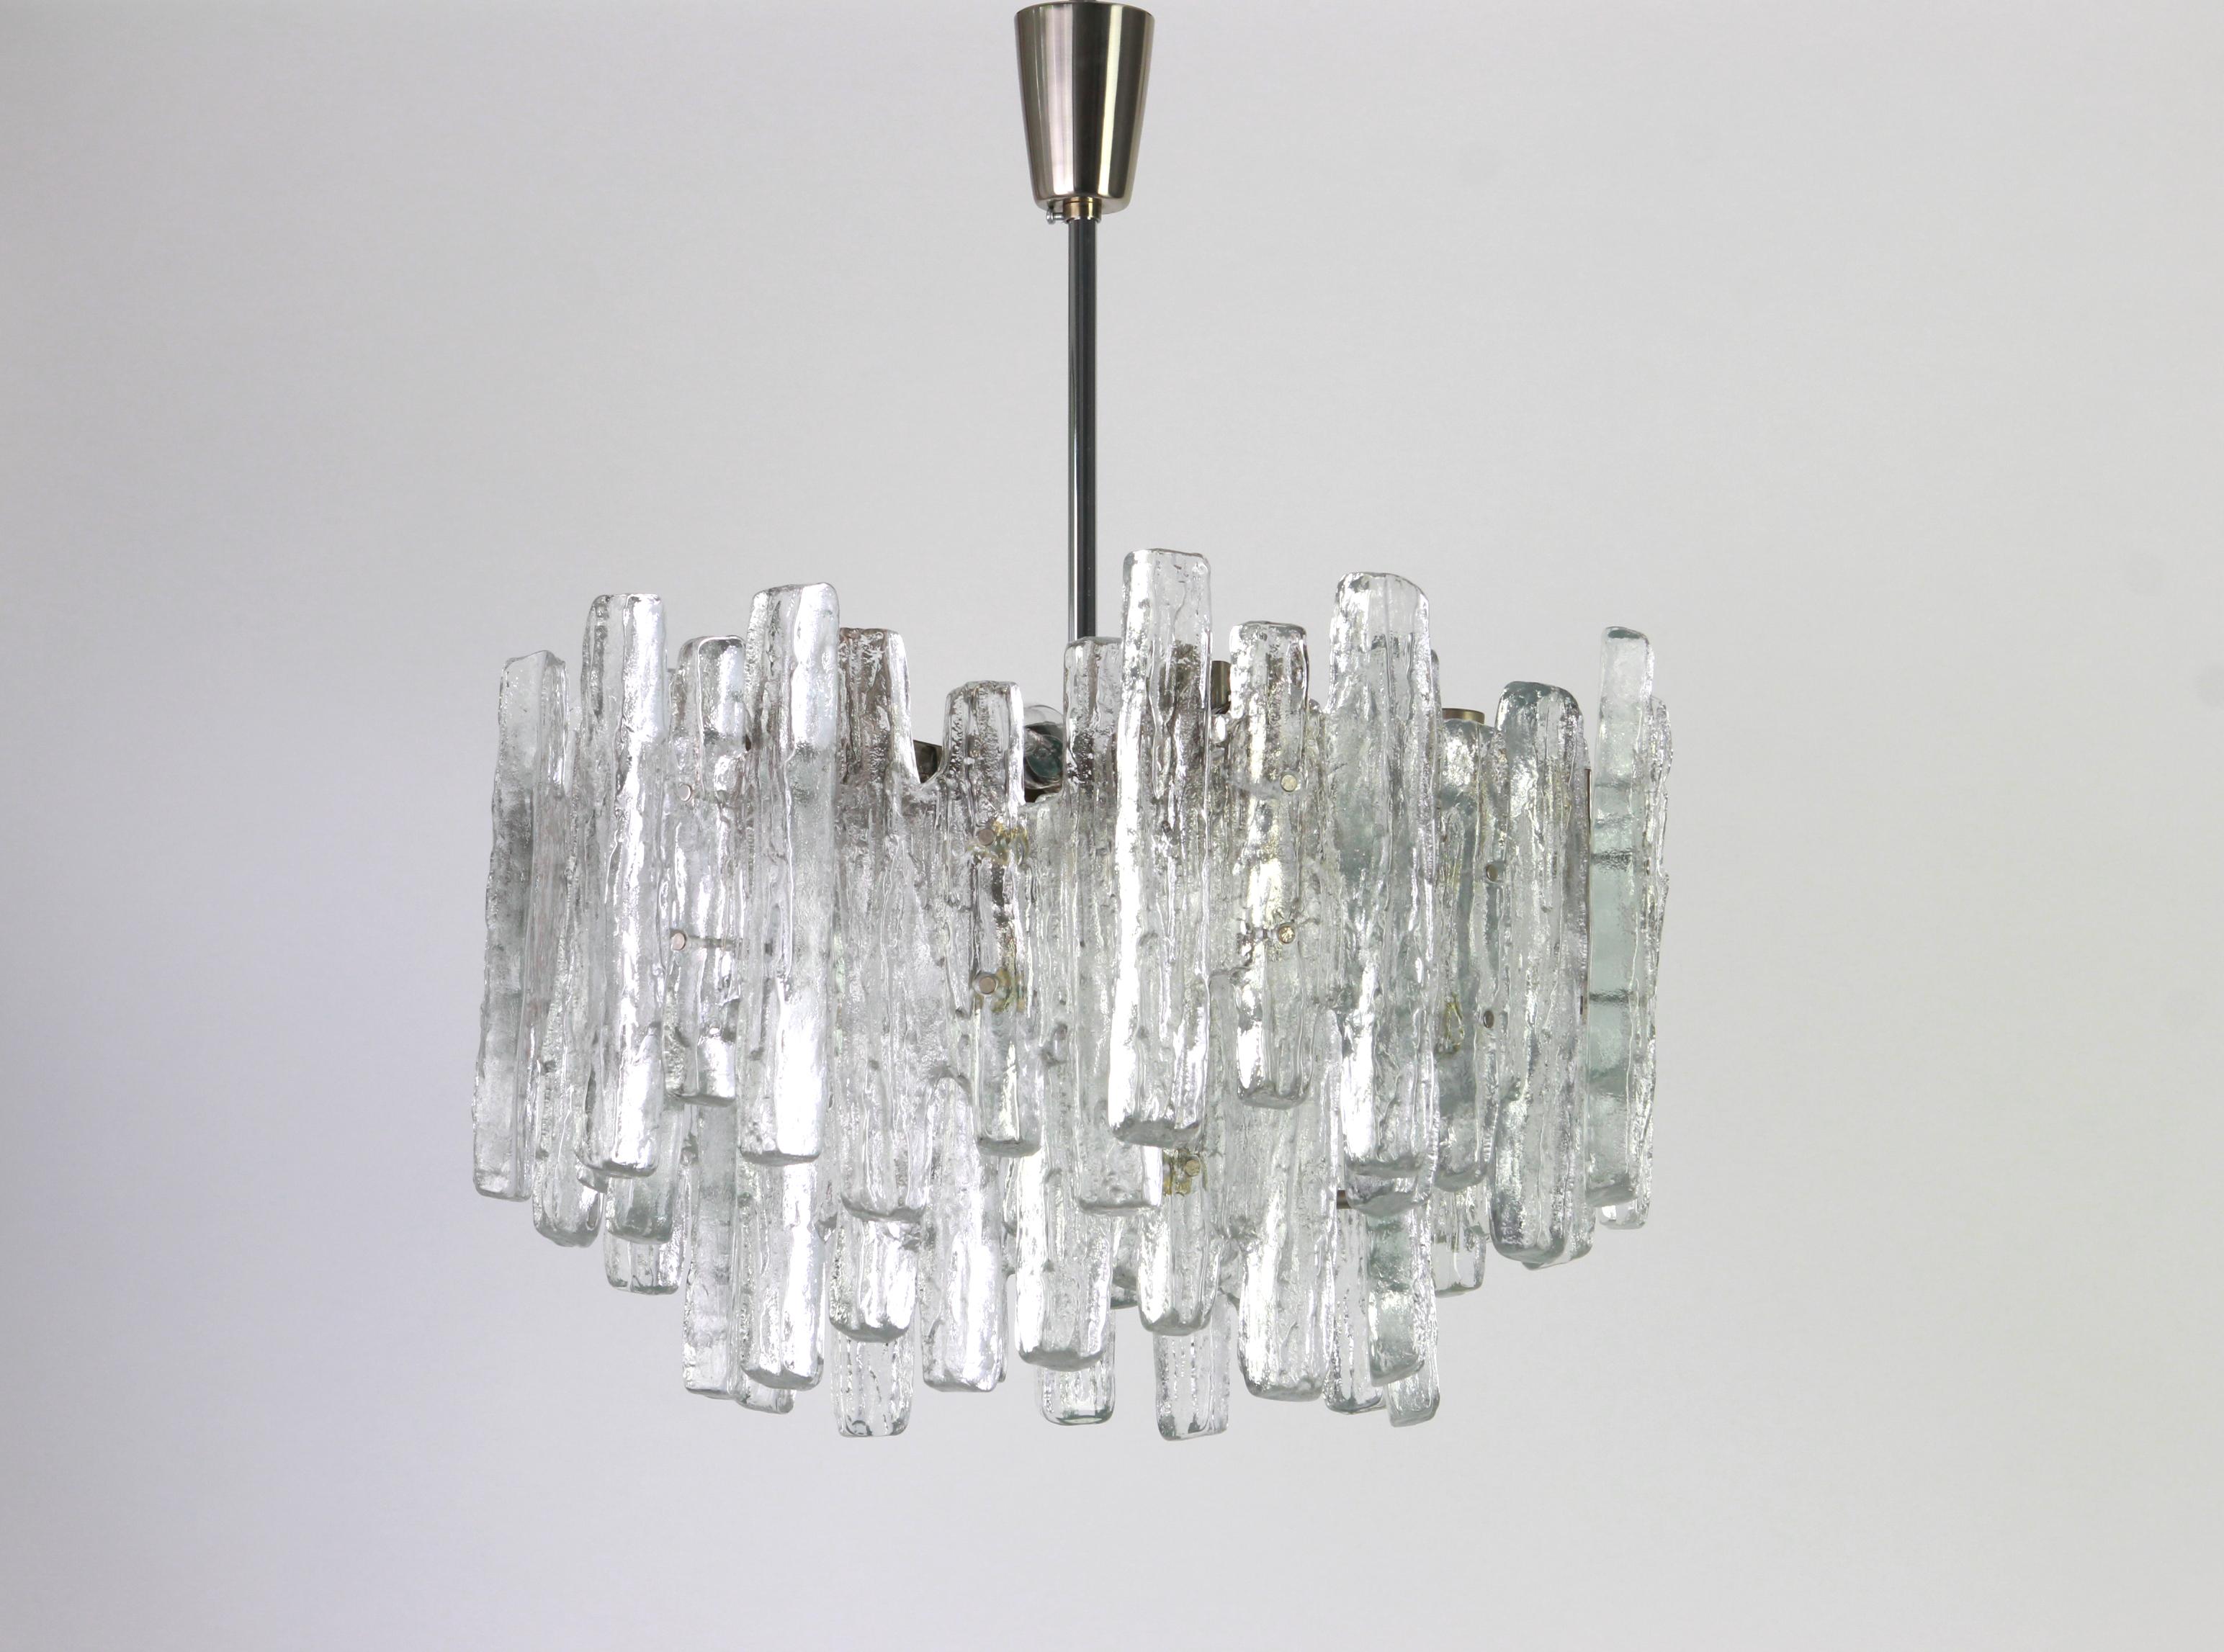 Stunning Murano glass chandelier by Kalmar, 1960s
Three tiers structure gathering 22 structured glasses, beautifully refracting the light very heavy quality.

High quality and in very good condition. Cleaned, well-wired and ready to use. 

The